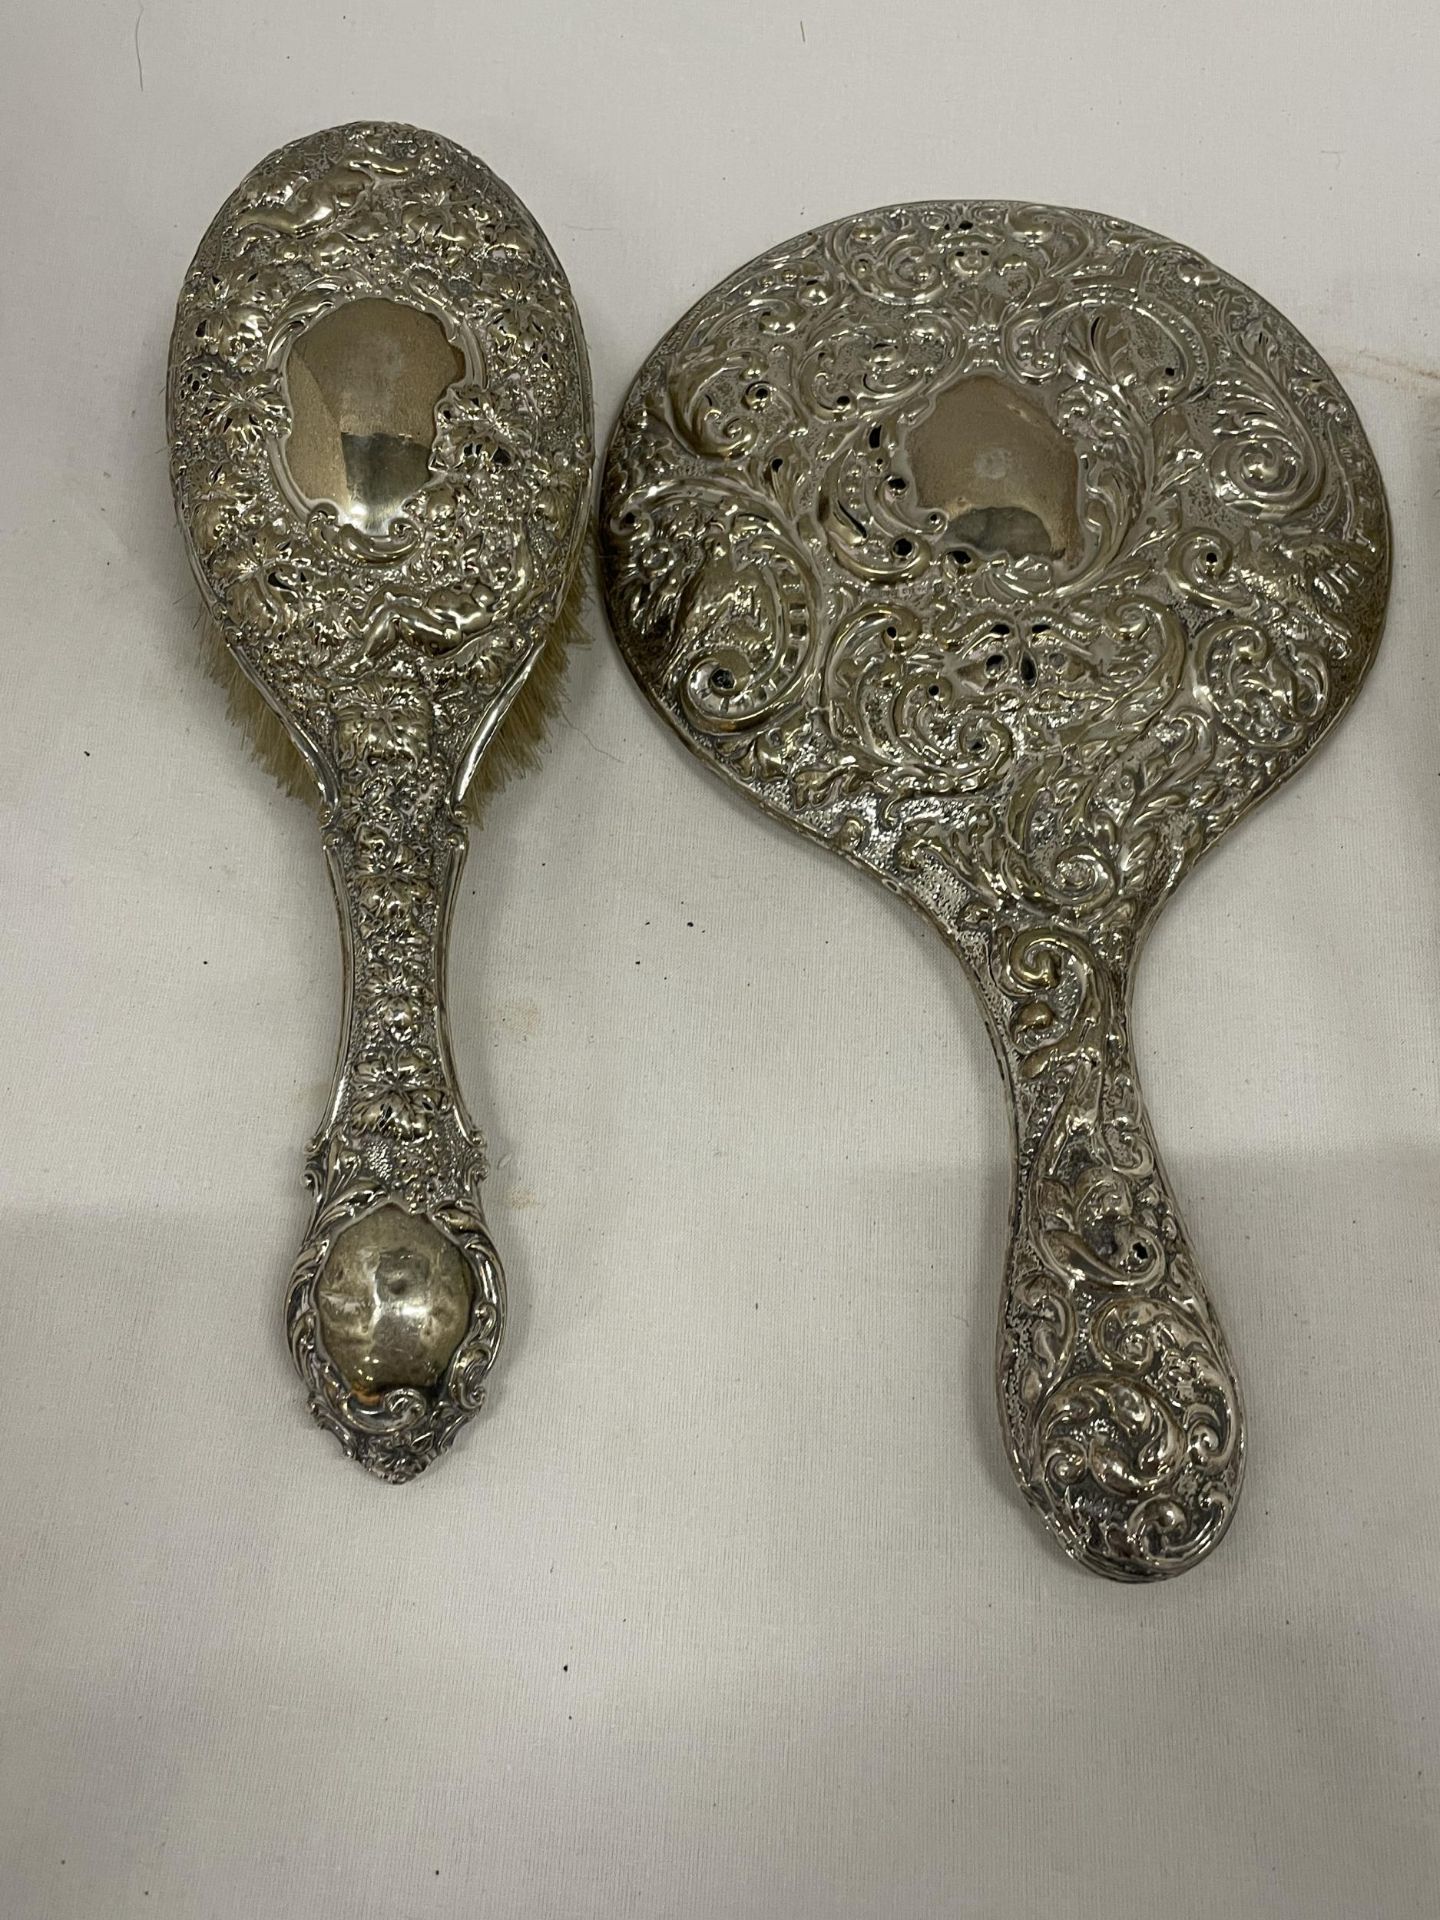 A HALLMARKED BIRMINGHAM SILVER BACKED SET OF TWO BRUSHES, A MIRROR AND COMB - Image 2 of 4